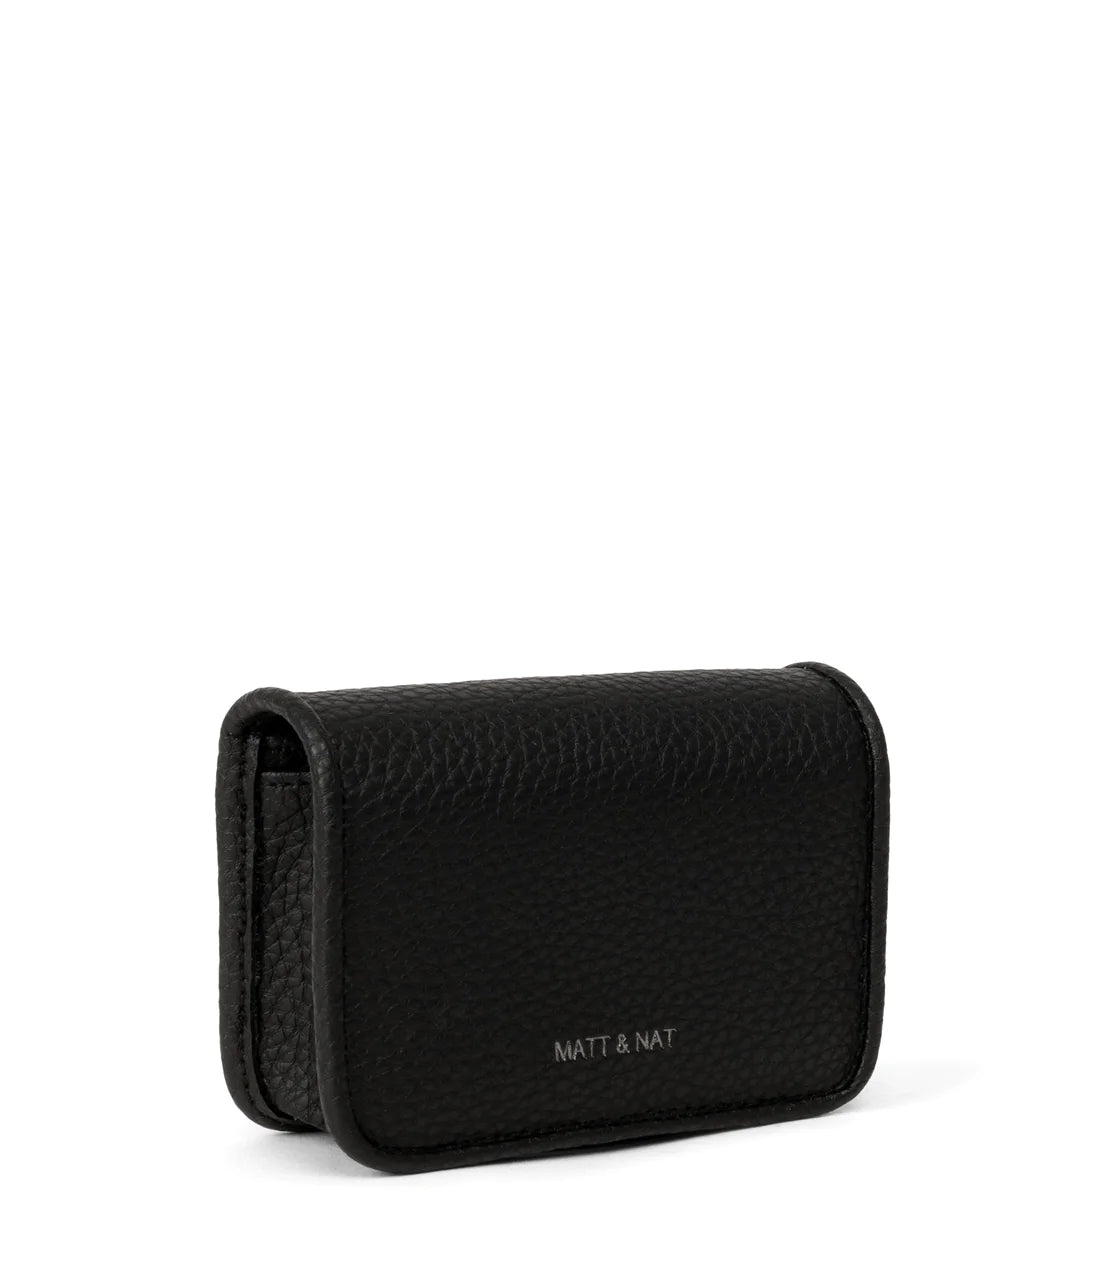 Wallets and Cardholders | Boes Ltd.